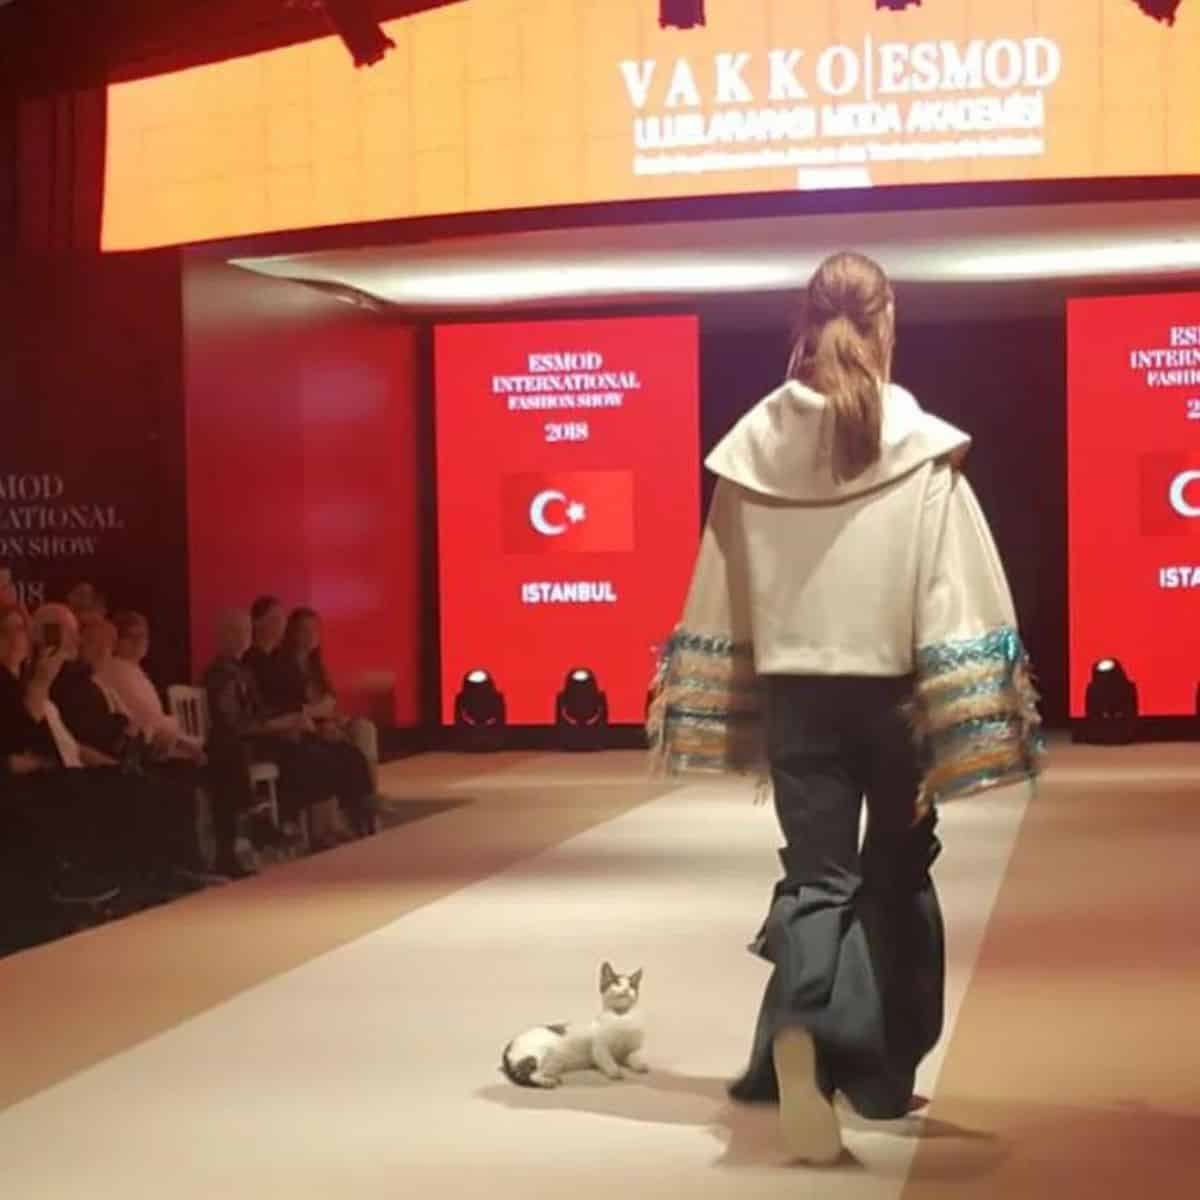 the cat lay down on the floor and watches a fashion show